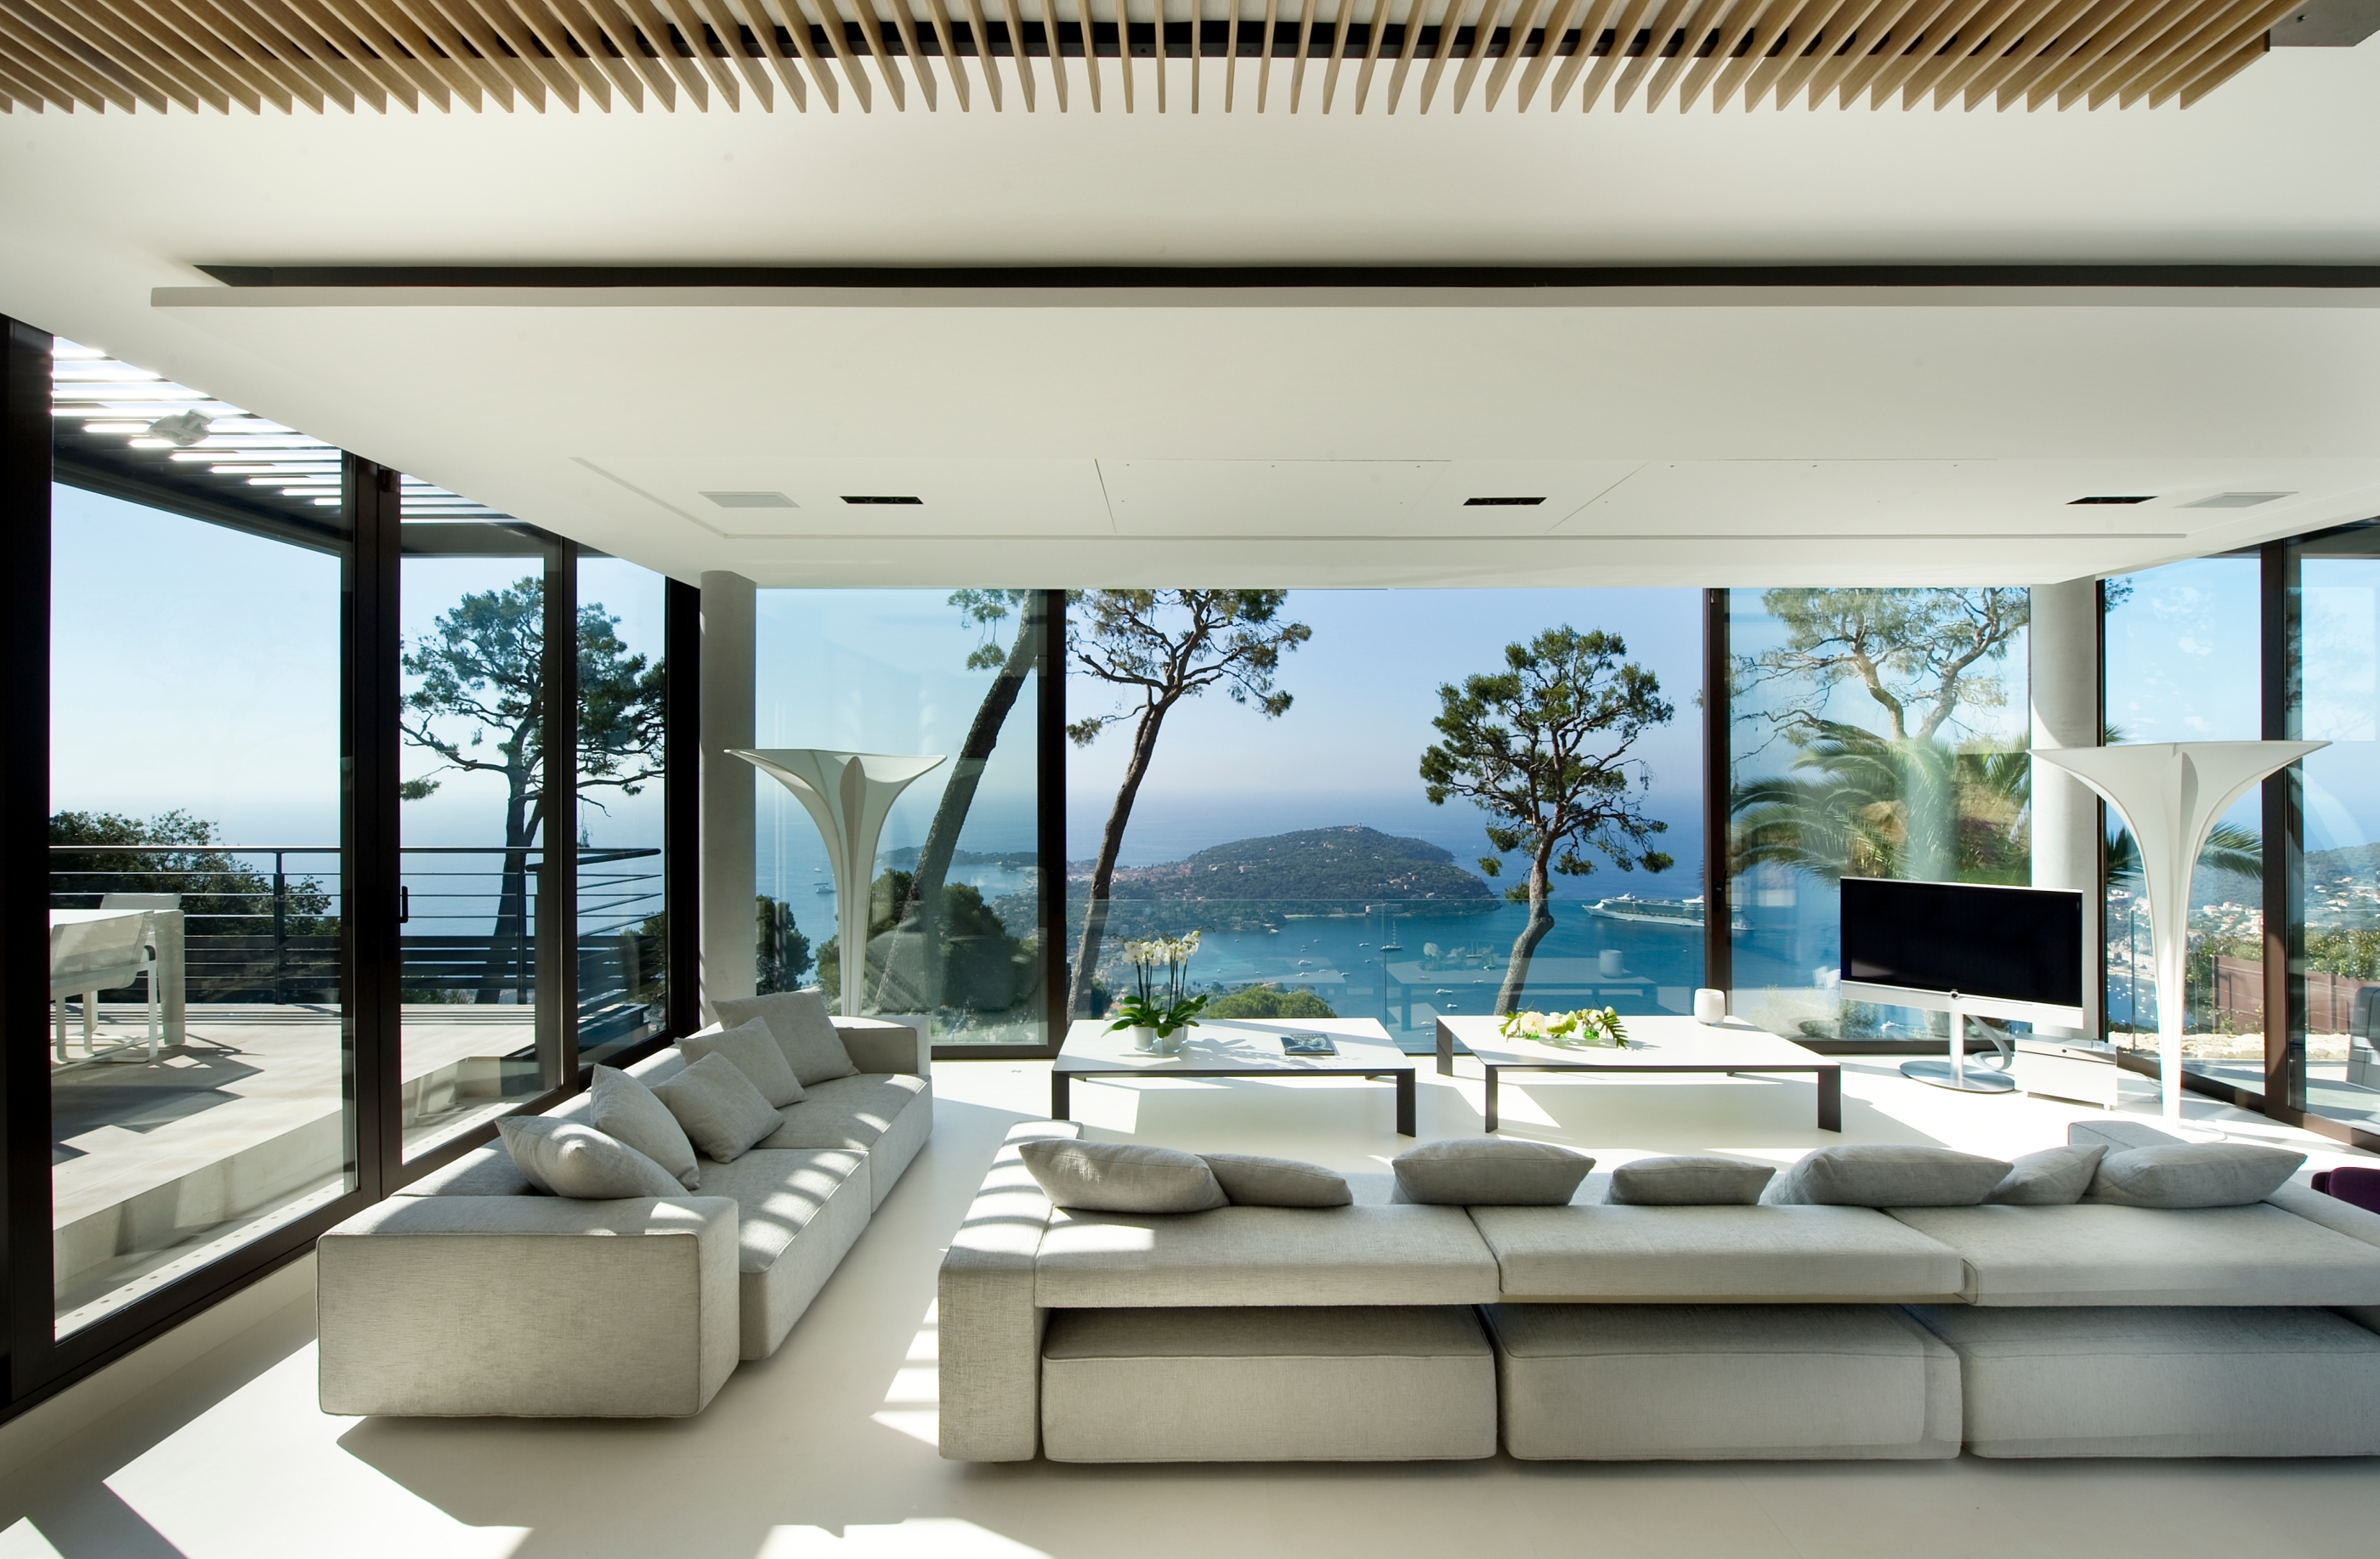 Seating area and view from Villa Bayview, Cote dAzur